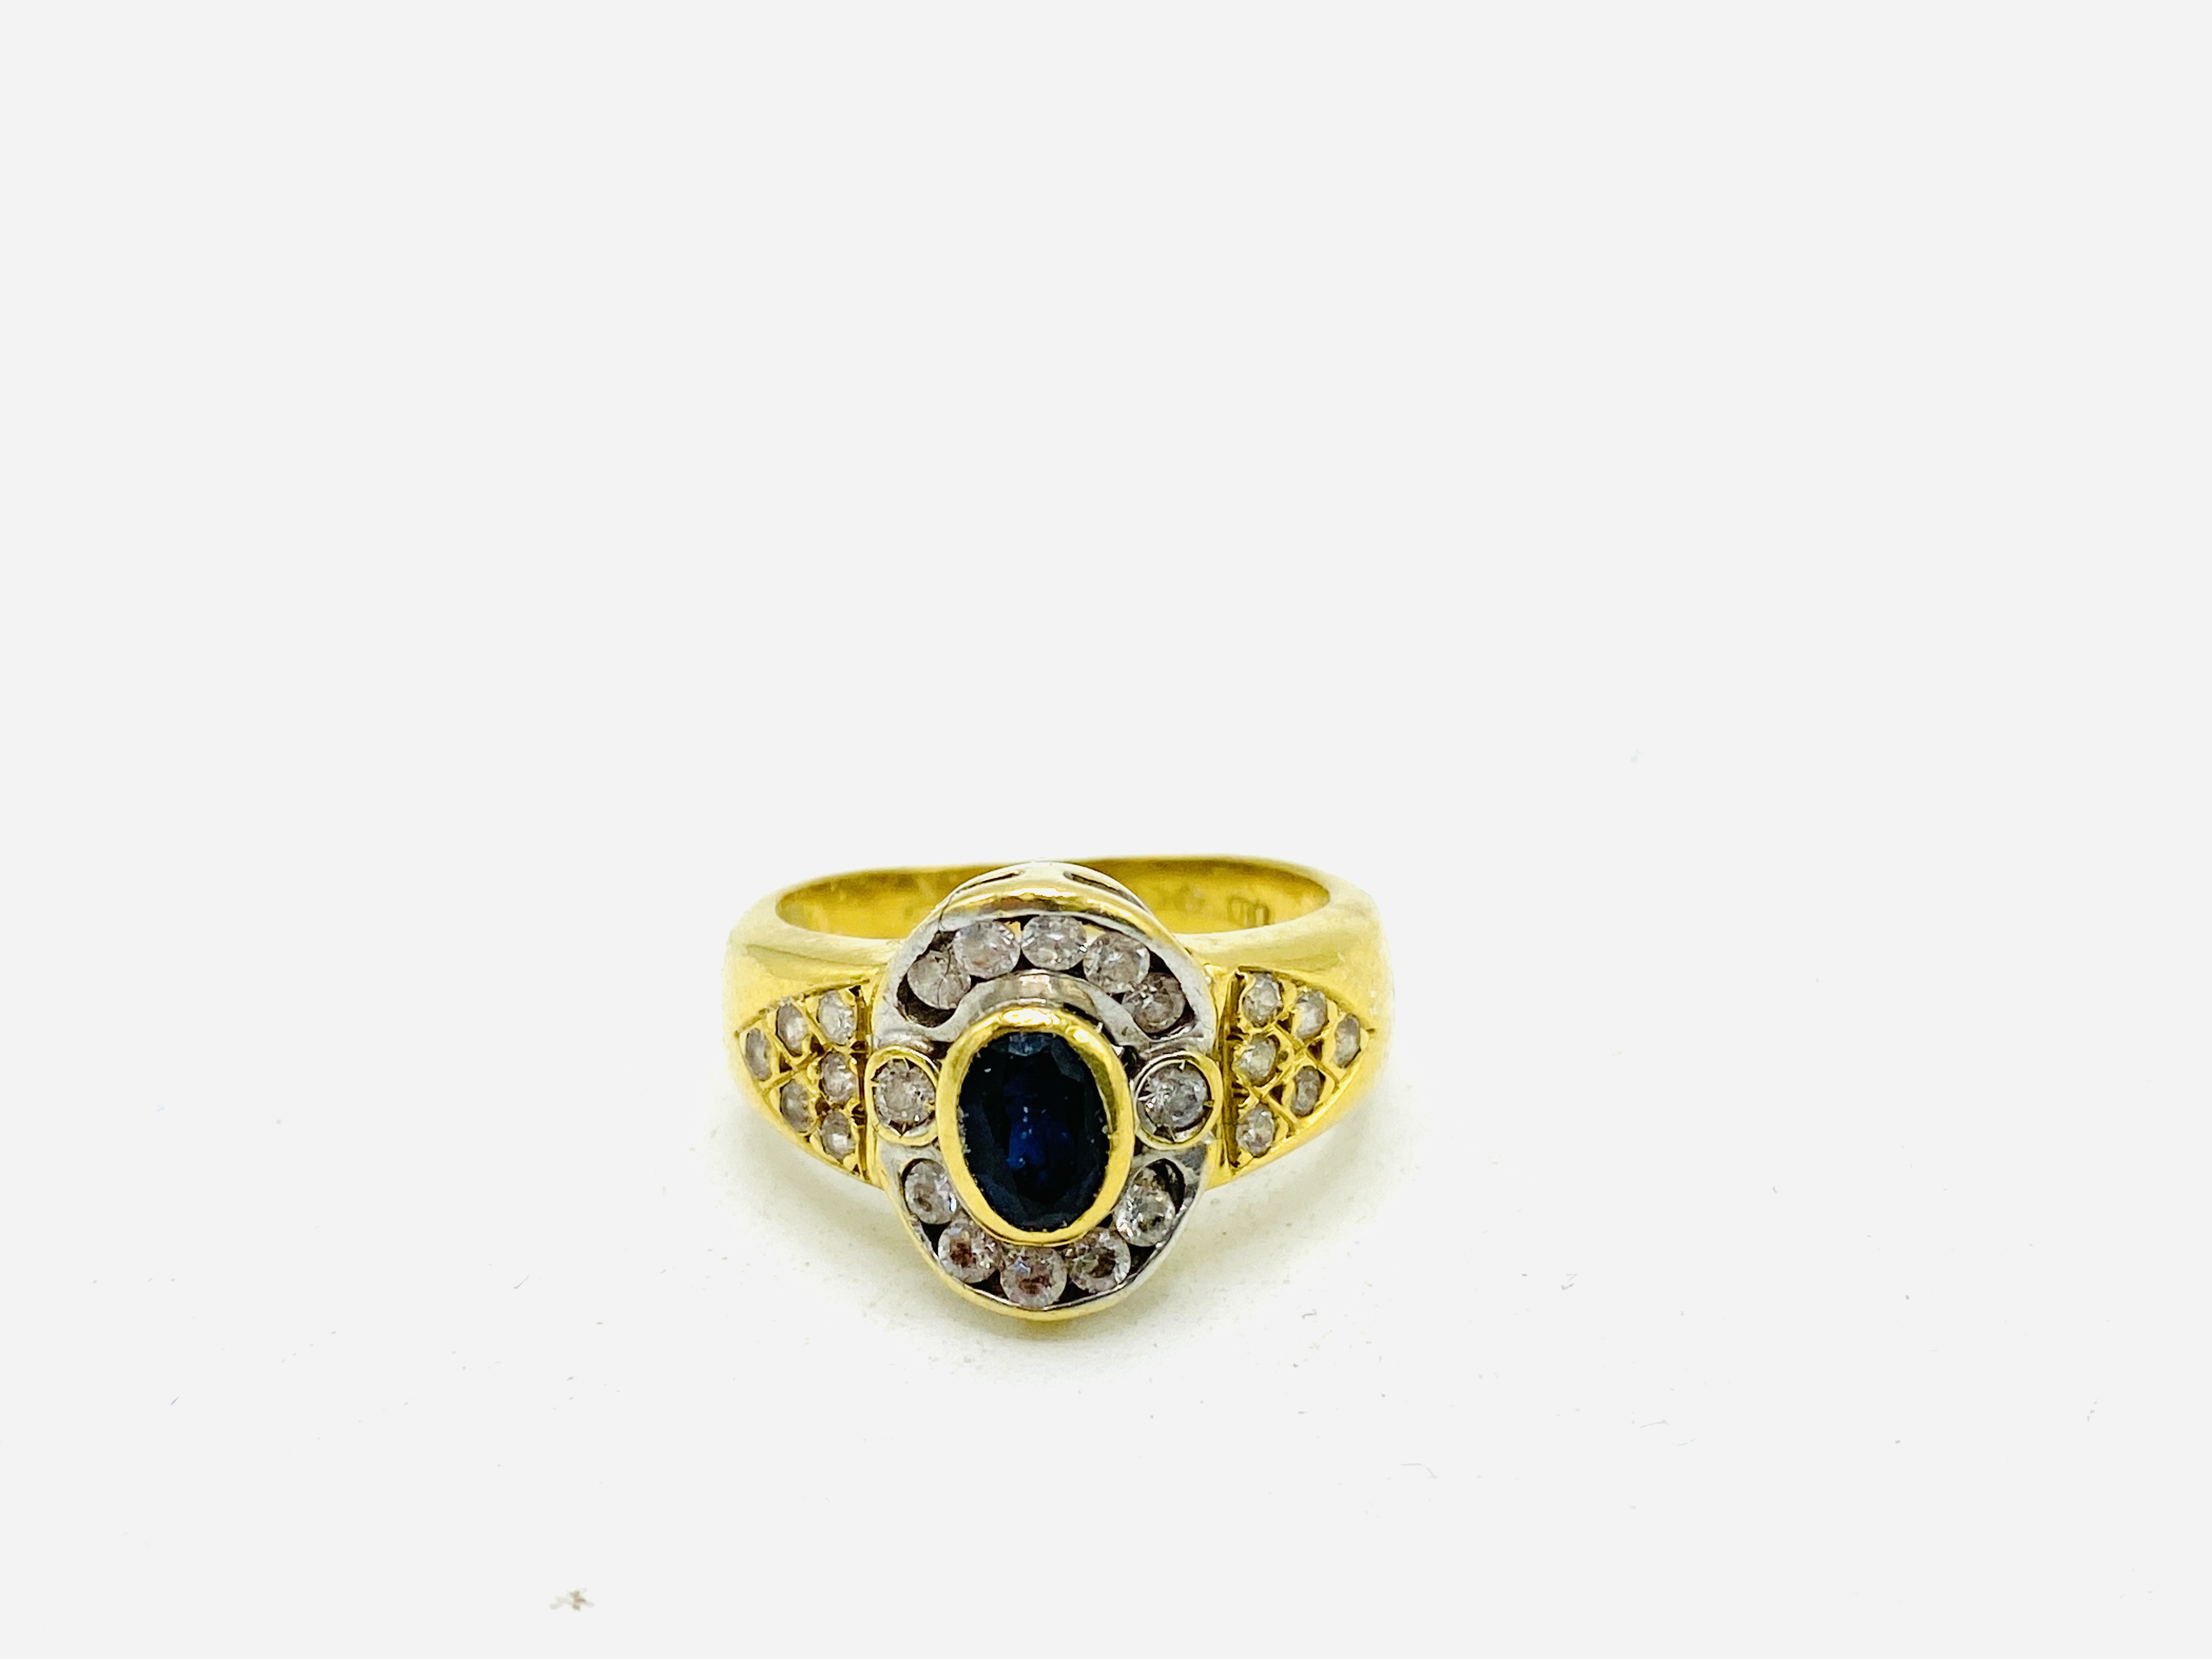 18ct gold, diamond and sapphire ring - Image 2 of 7